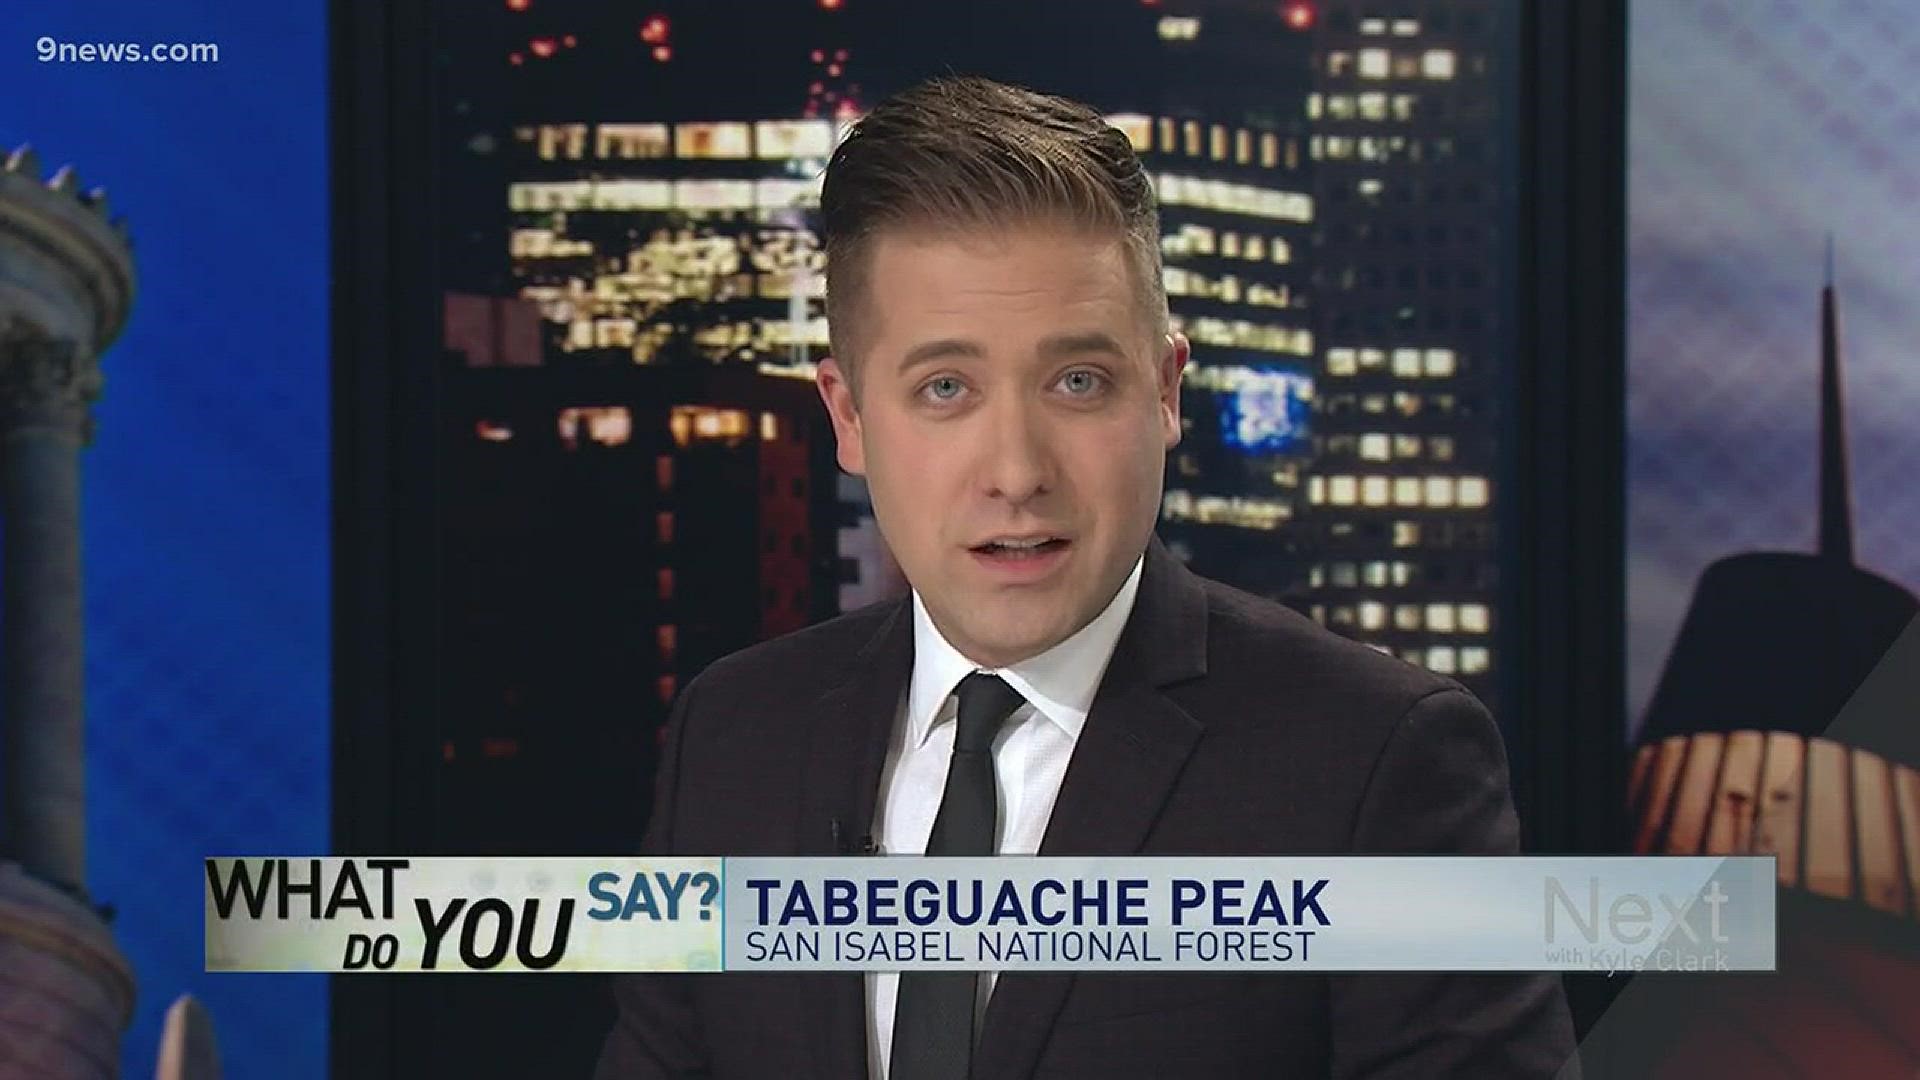 There's a 14er in the San Isabel National forest with a name that starts with a T. We reached out to the forest service to find out the correct pronunciation.